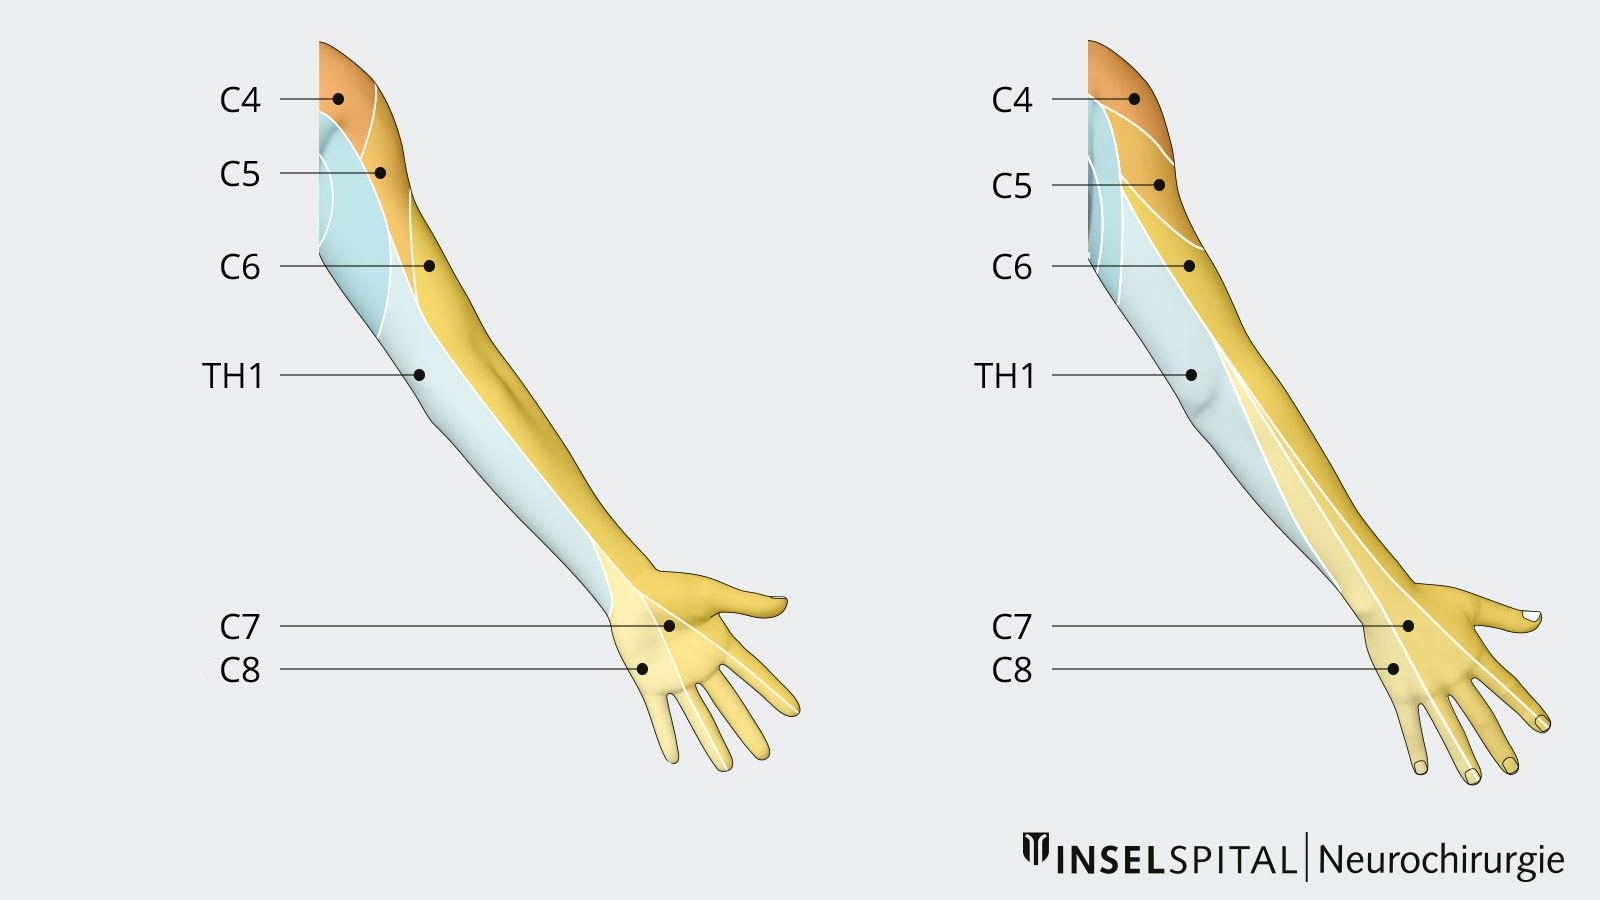 Drawing of the dermatomes on the hand and arm